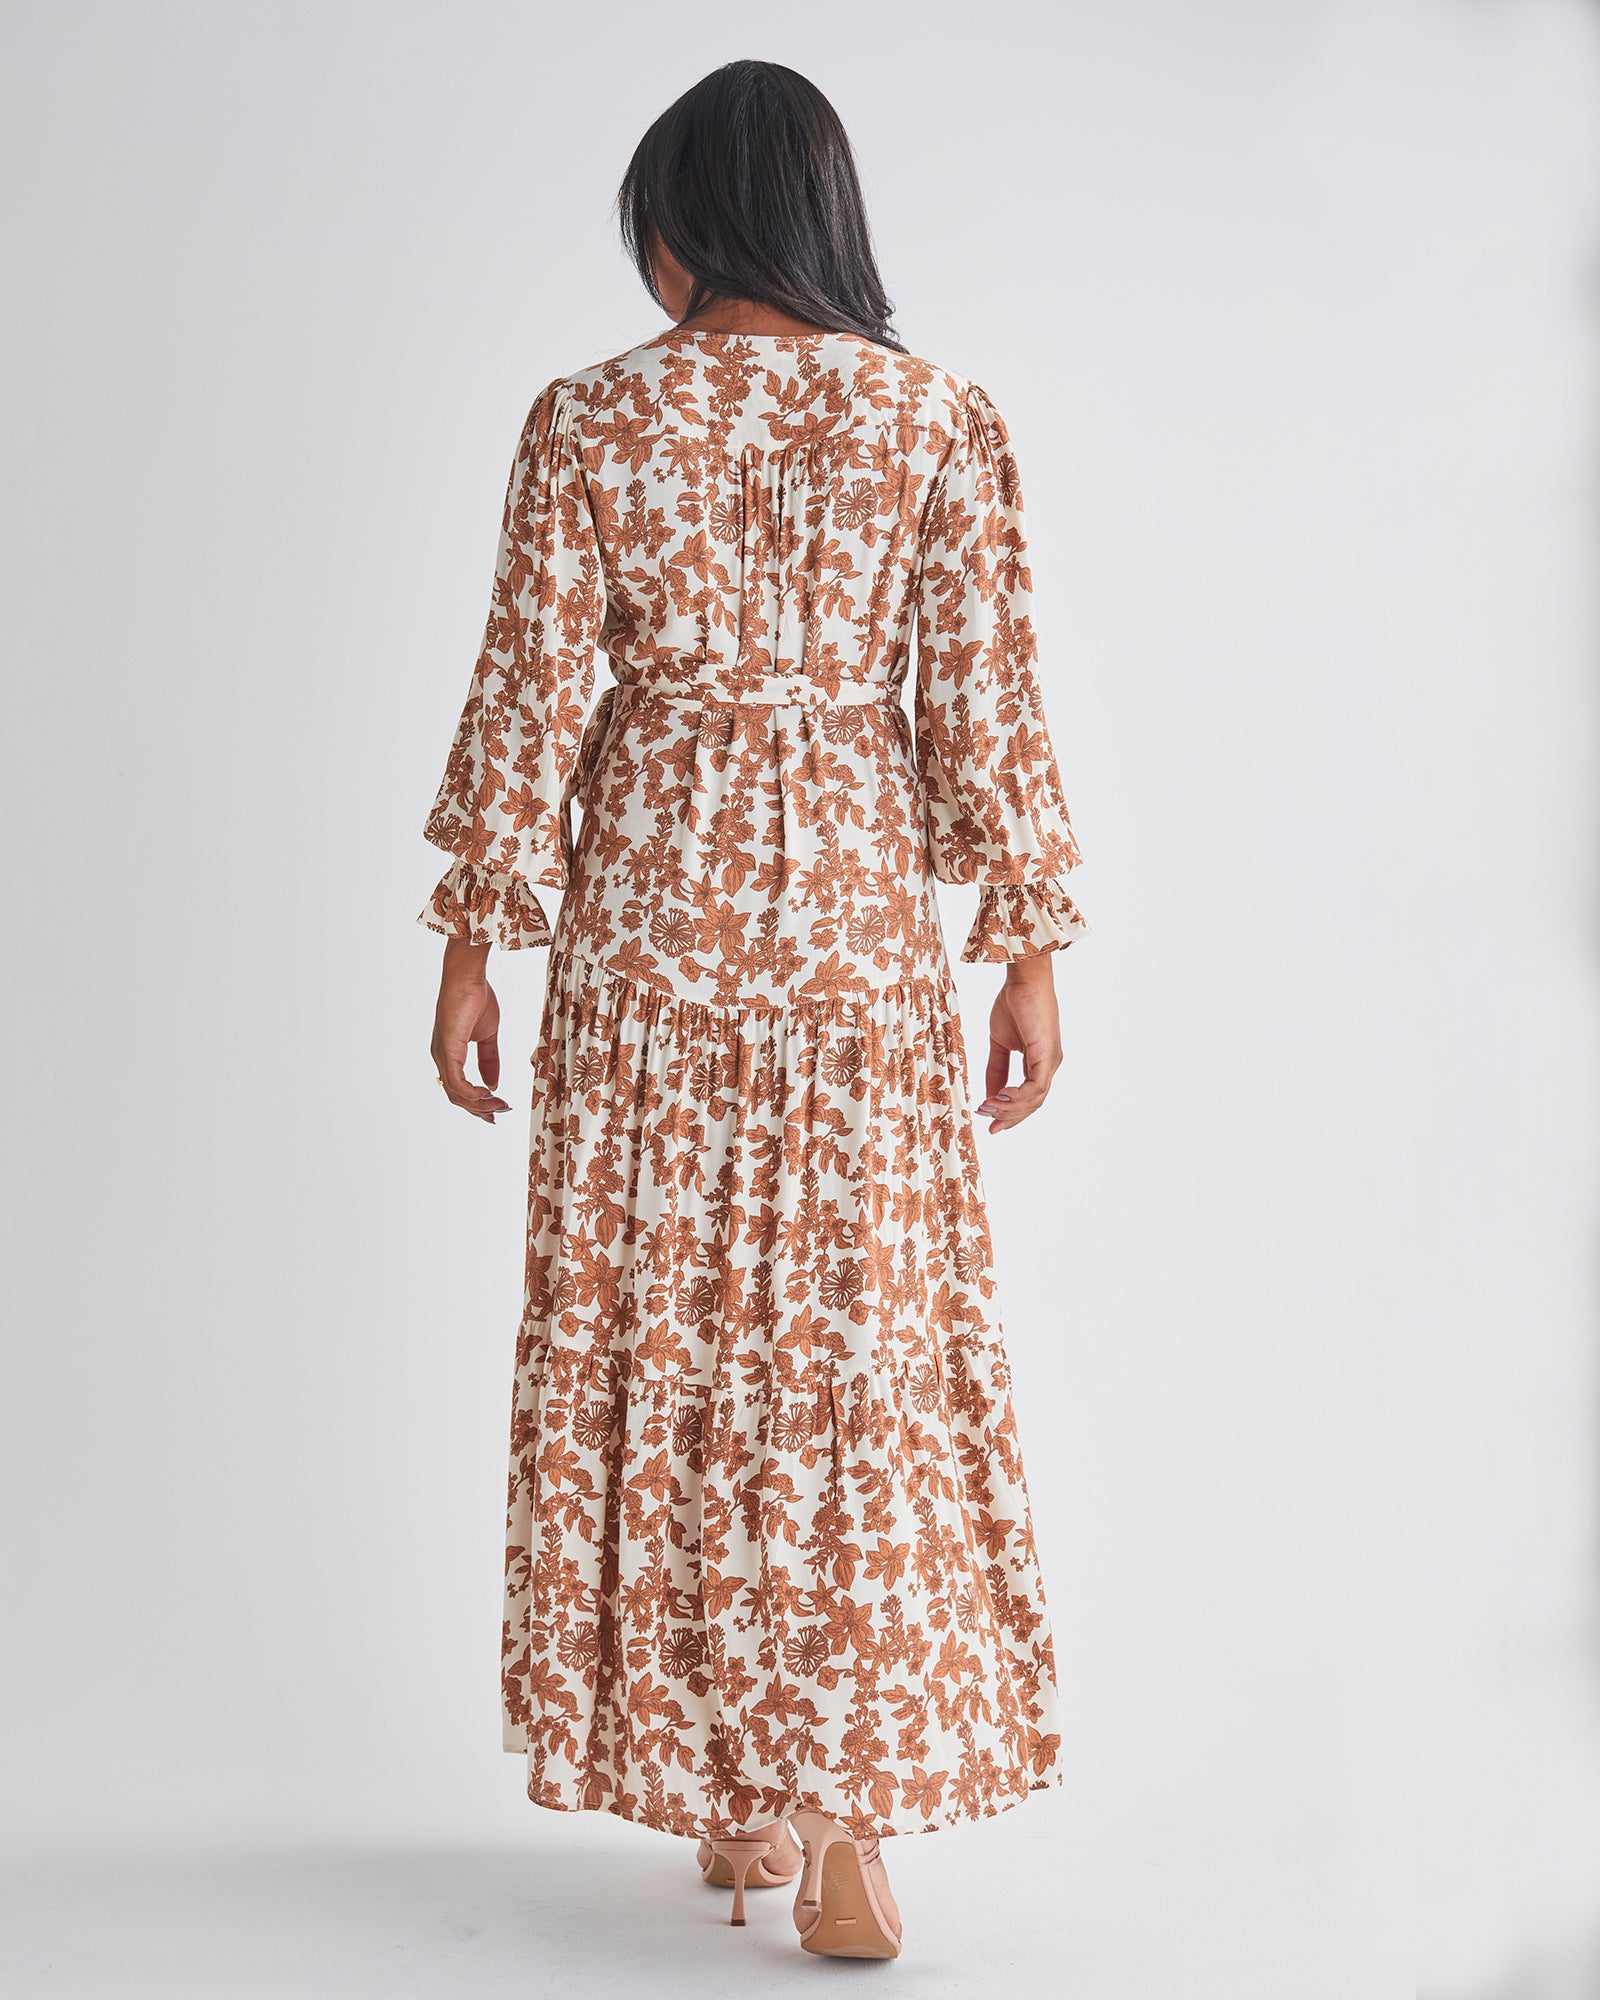 back view-Maternity and nursing -Maxi length- Nude Floral Print- Wrap Dress with Tie-Sleeve Relaxed Fit from AngelMaternity